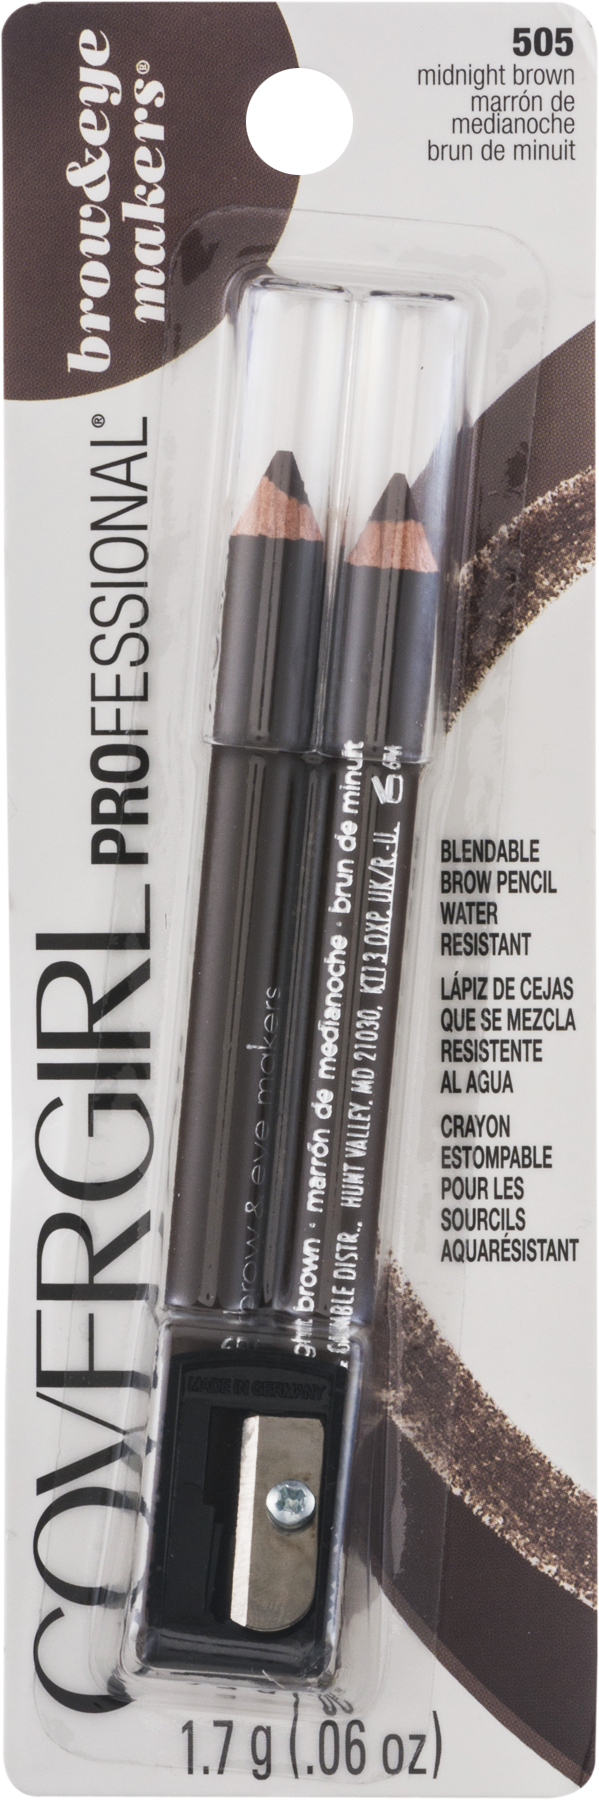 Covergirl Professional Brow&Eye Makers 505 Midnight Brown, 0.06 OZ - image 2 of 9